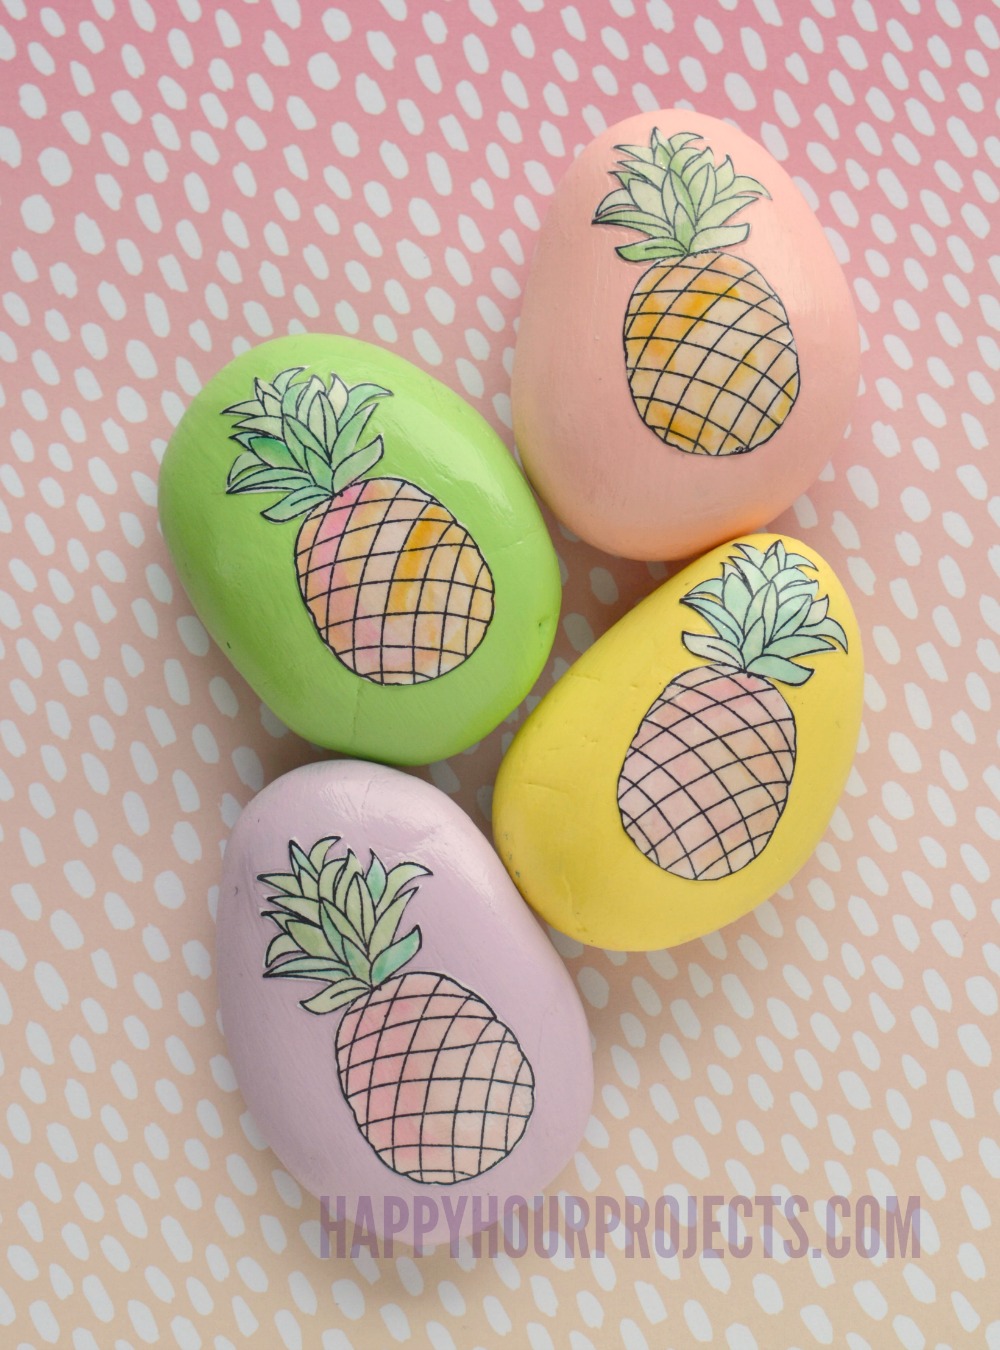 Easy Pineapple Decoupage Painted Rocks at happyhourprojects.com Make awesome painted rocks using stamps, paper and decoupage medium! Mod Podge is great for adding images to plain painted rocks.